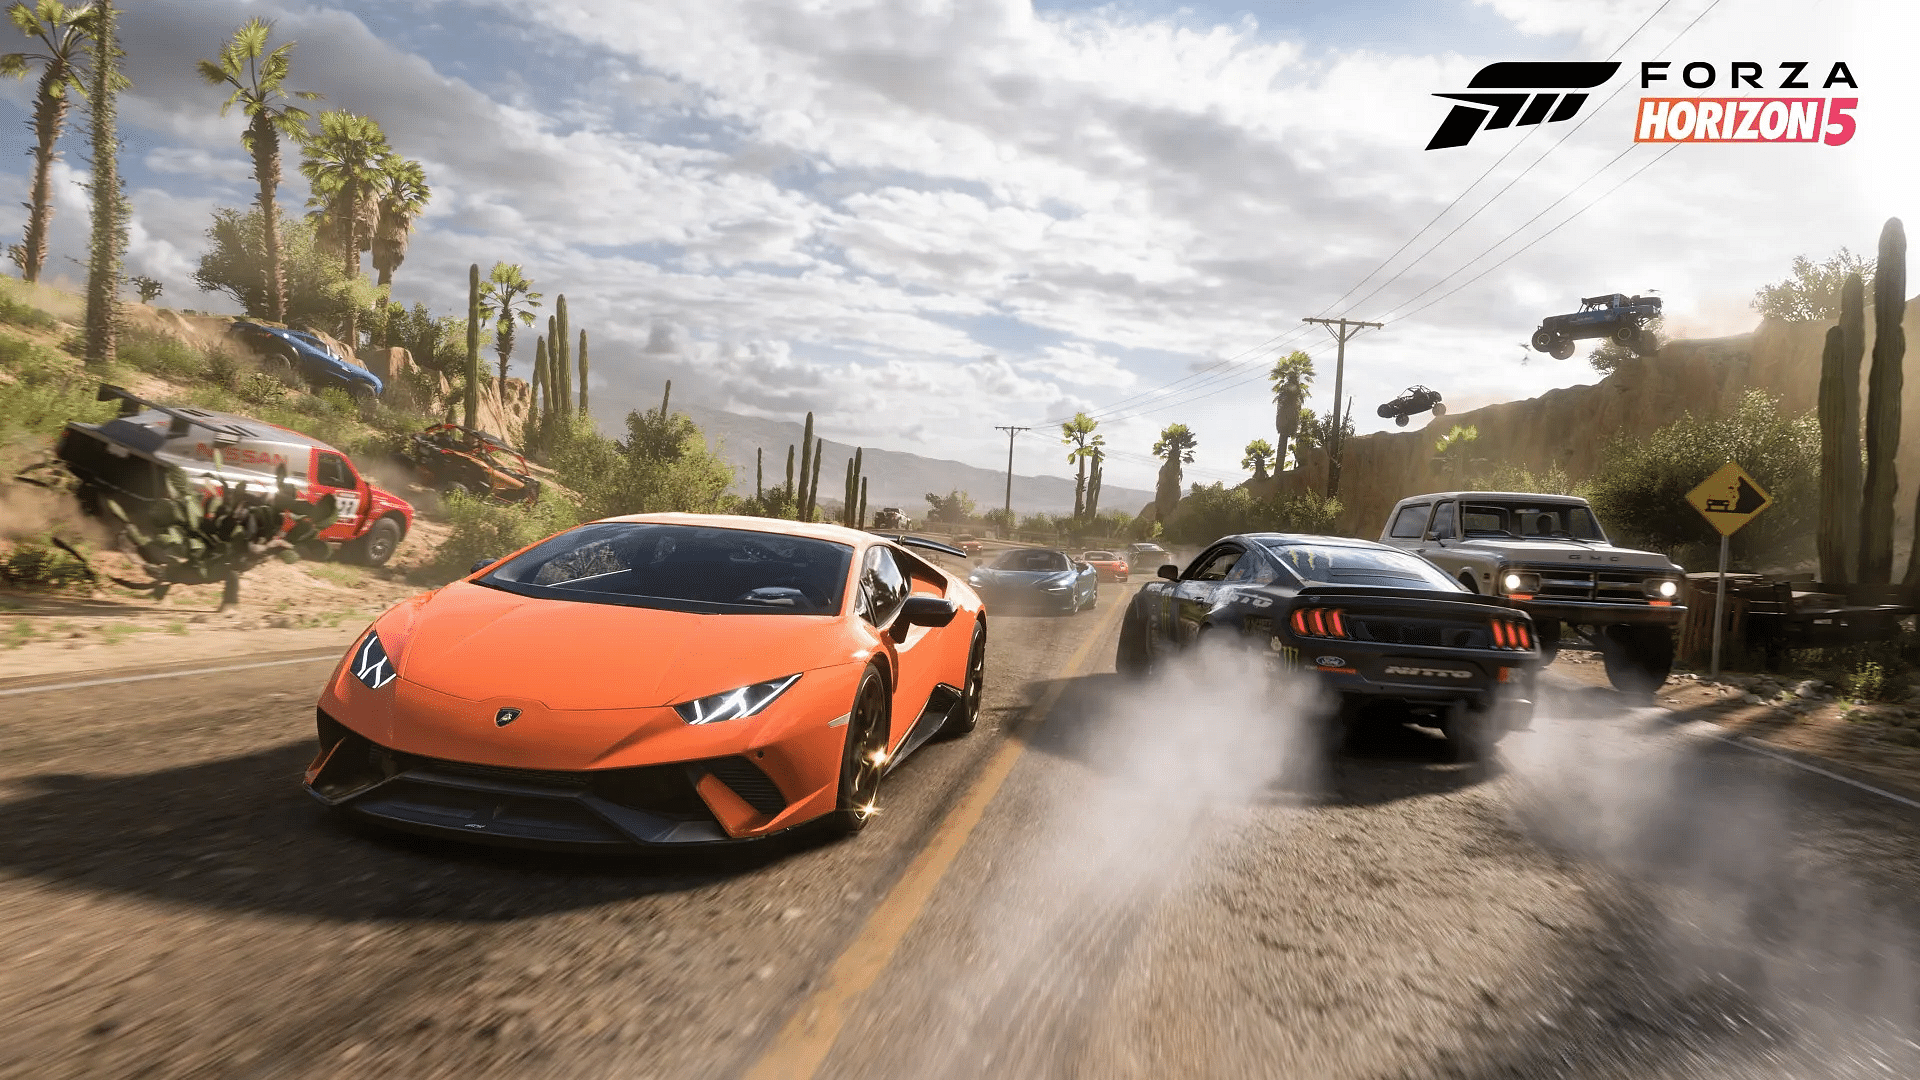 Series 20 High Performance is coming to Forza Horizon 5